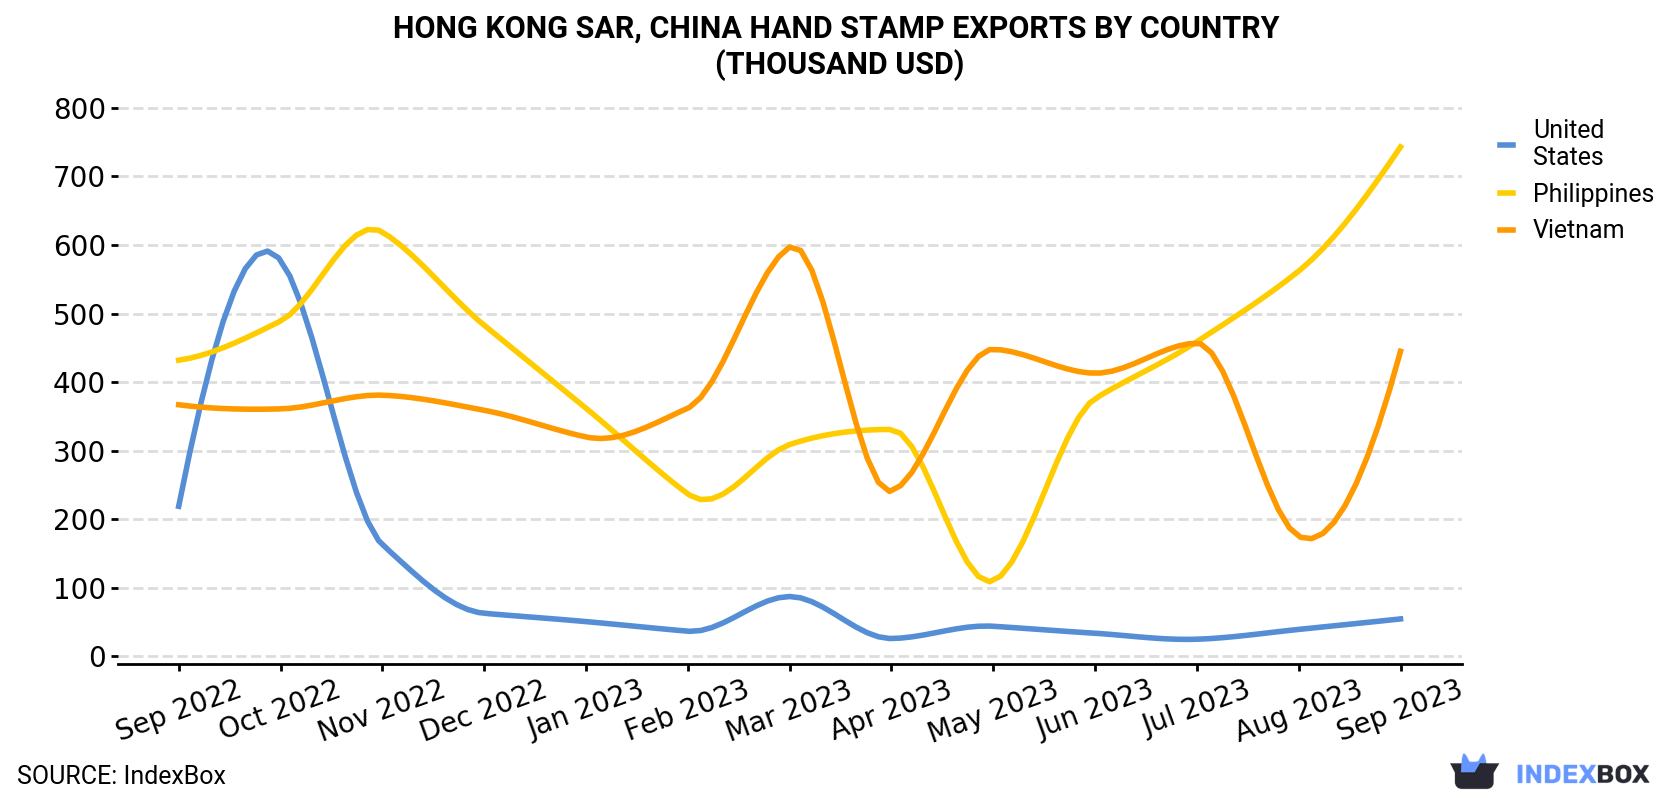 Hong Kong Hand Stamp Exports By Country (Thousand USD)